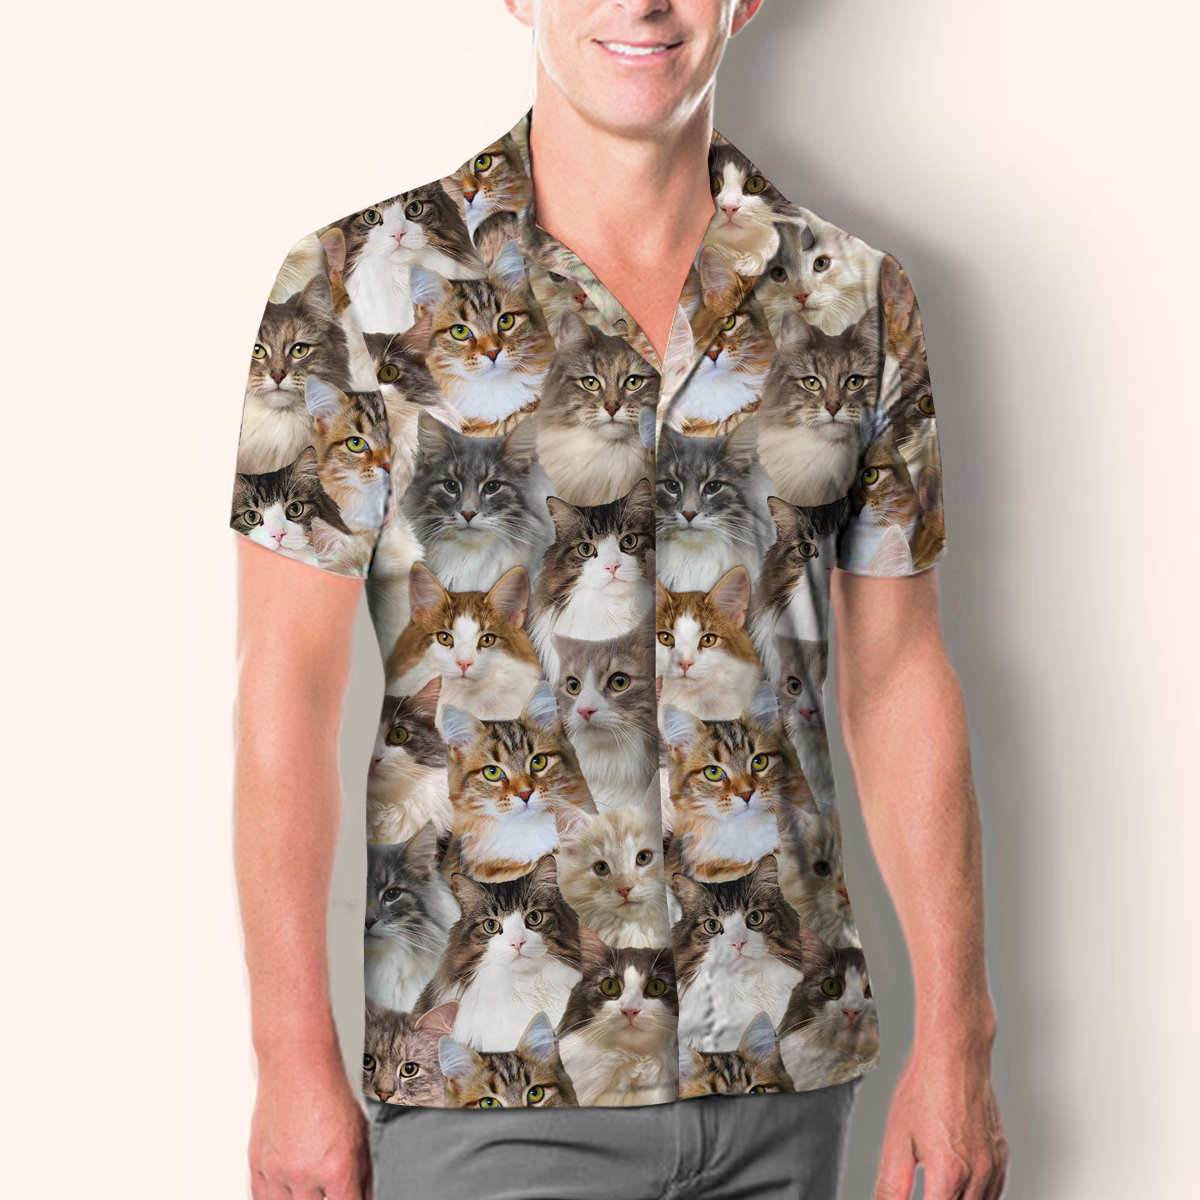 You Will Have A Bunch Of Norwegian Forest Cats - Shirt V1